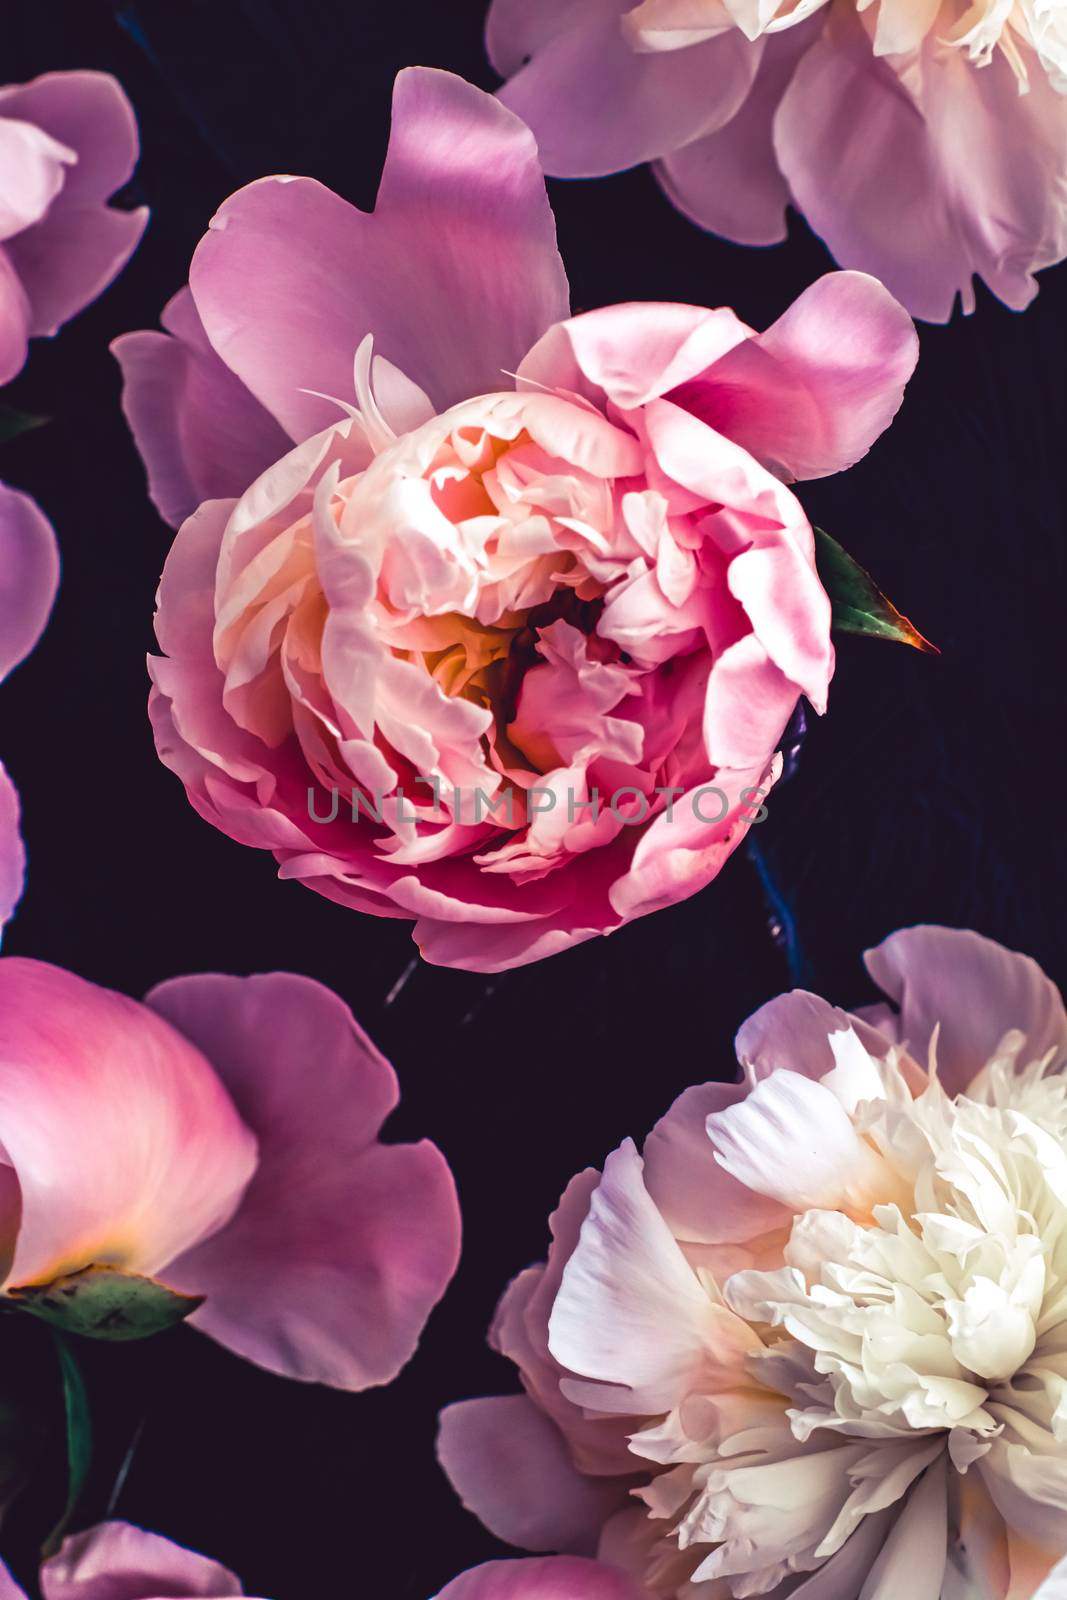 Pink peony flowers as floral art background, botanical flatlay and luxury branding design